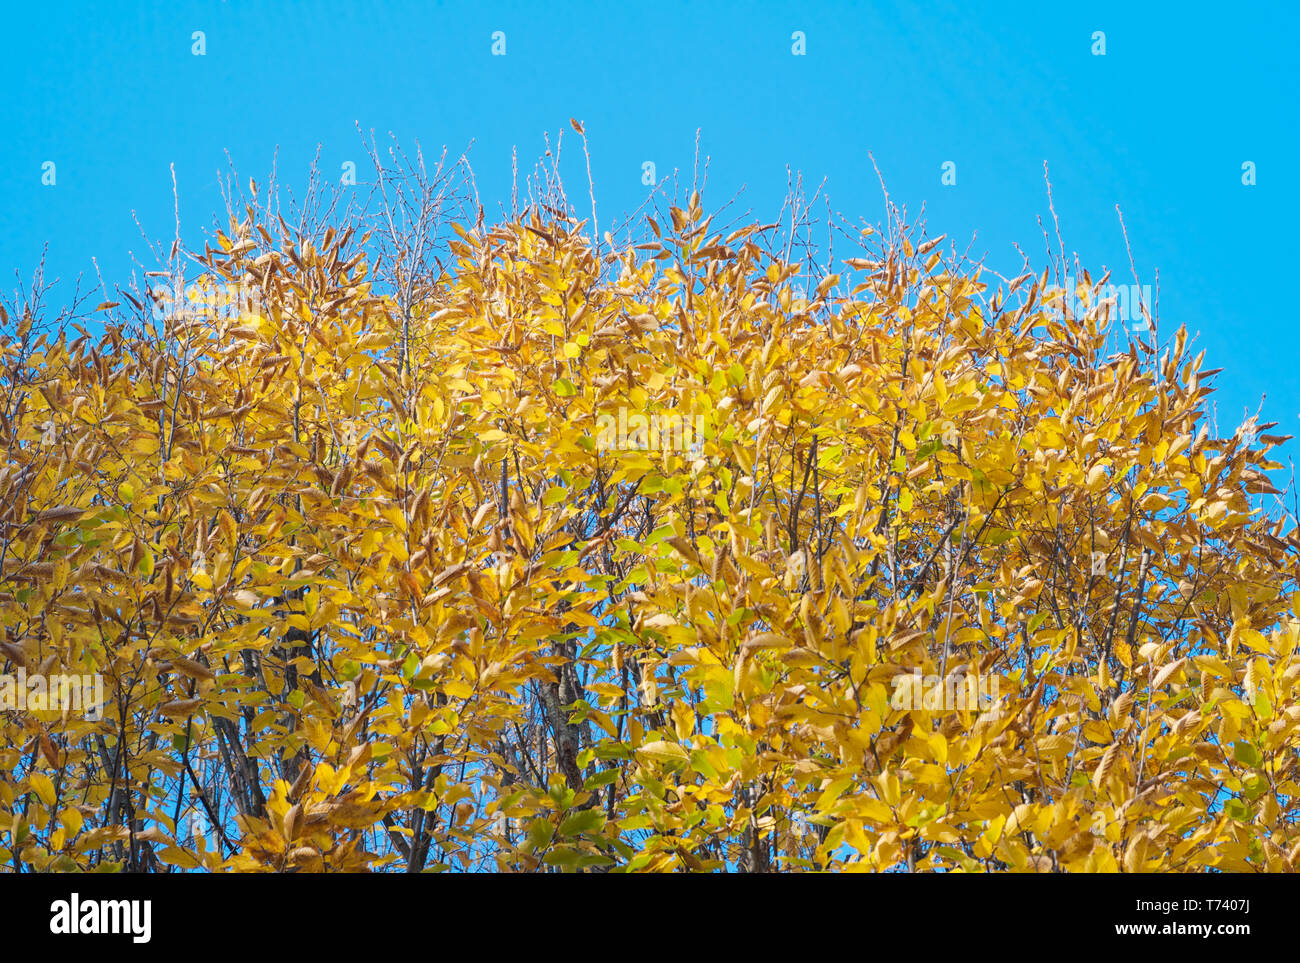 Autumn Background: Yellow, Golden and Orange Leaves on a Tree Against a Bright Blue Sky Stock Photo